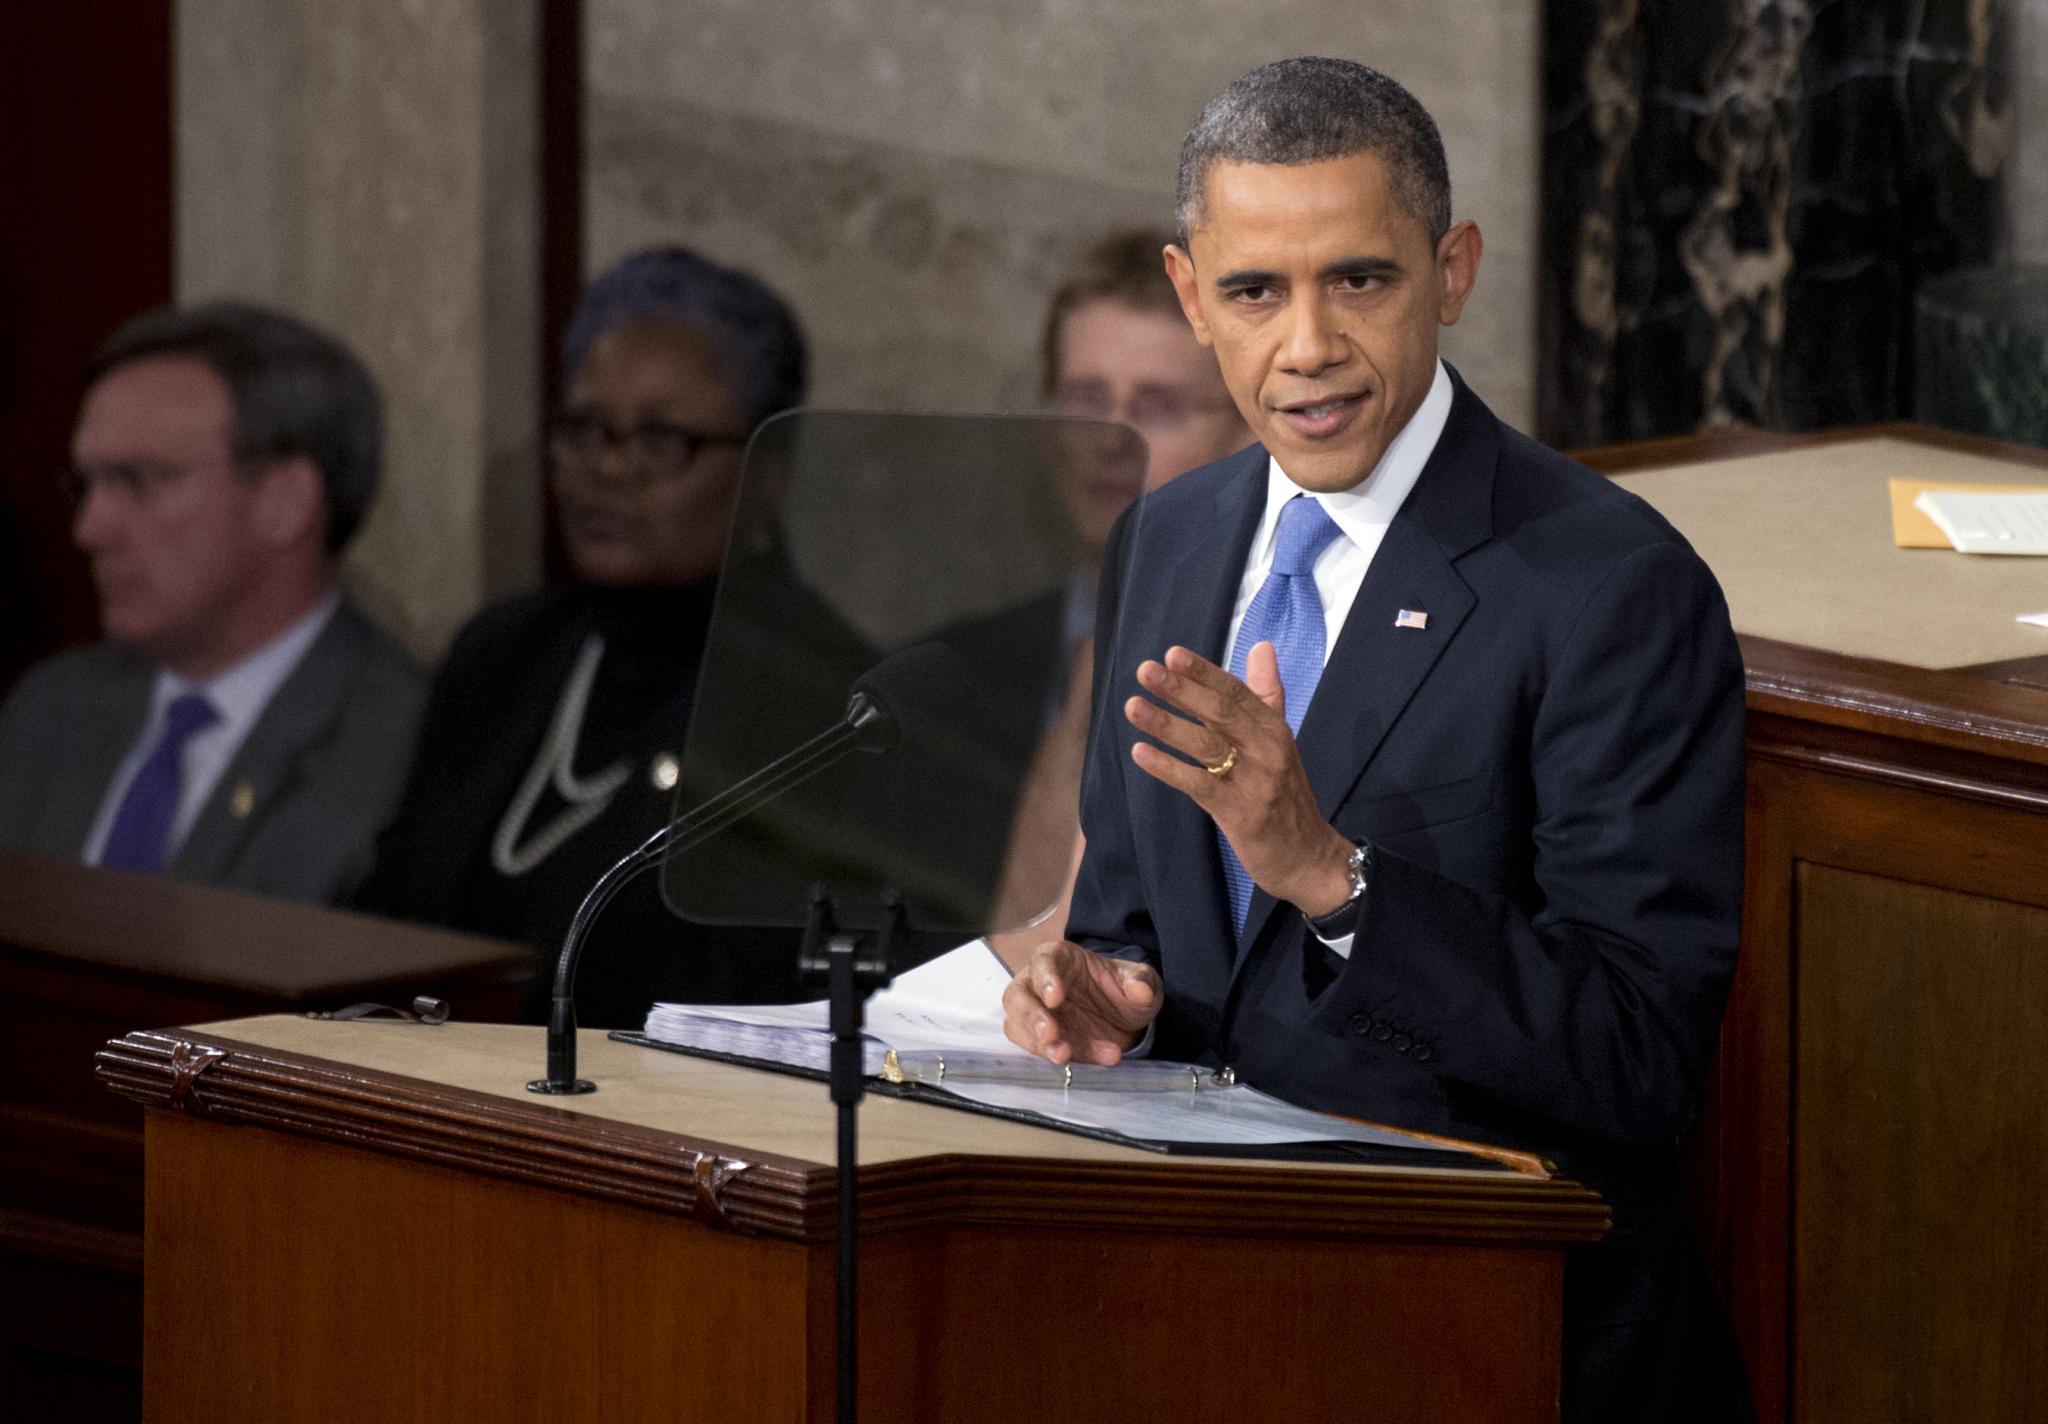 What Do You Want To Hear In Obama's State of the Union Speech?